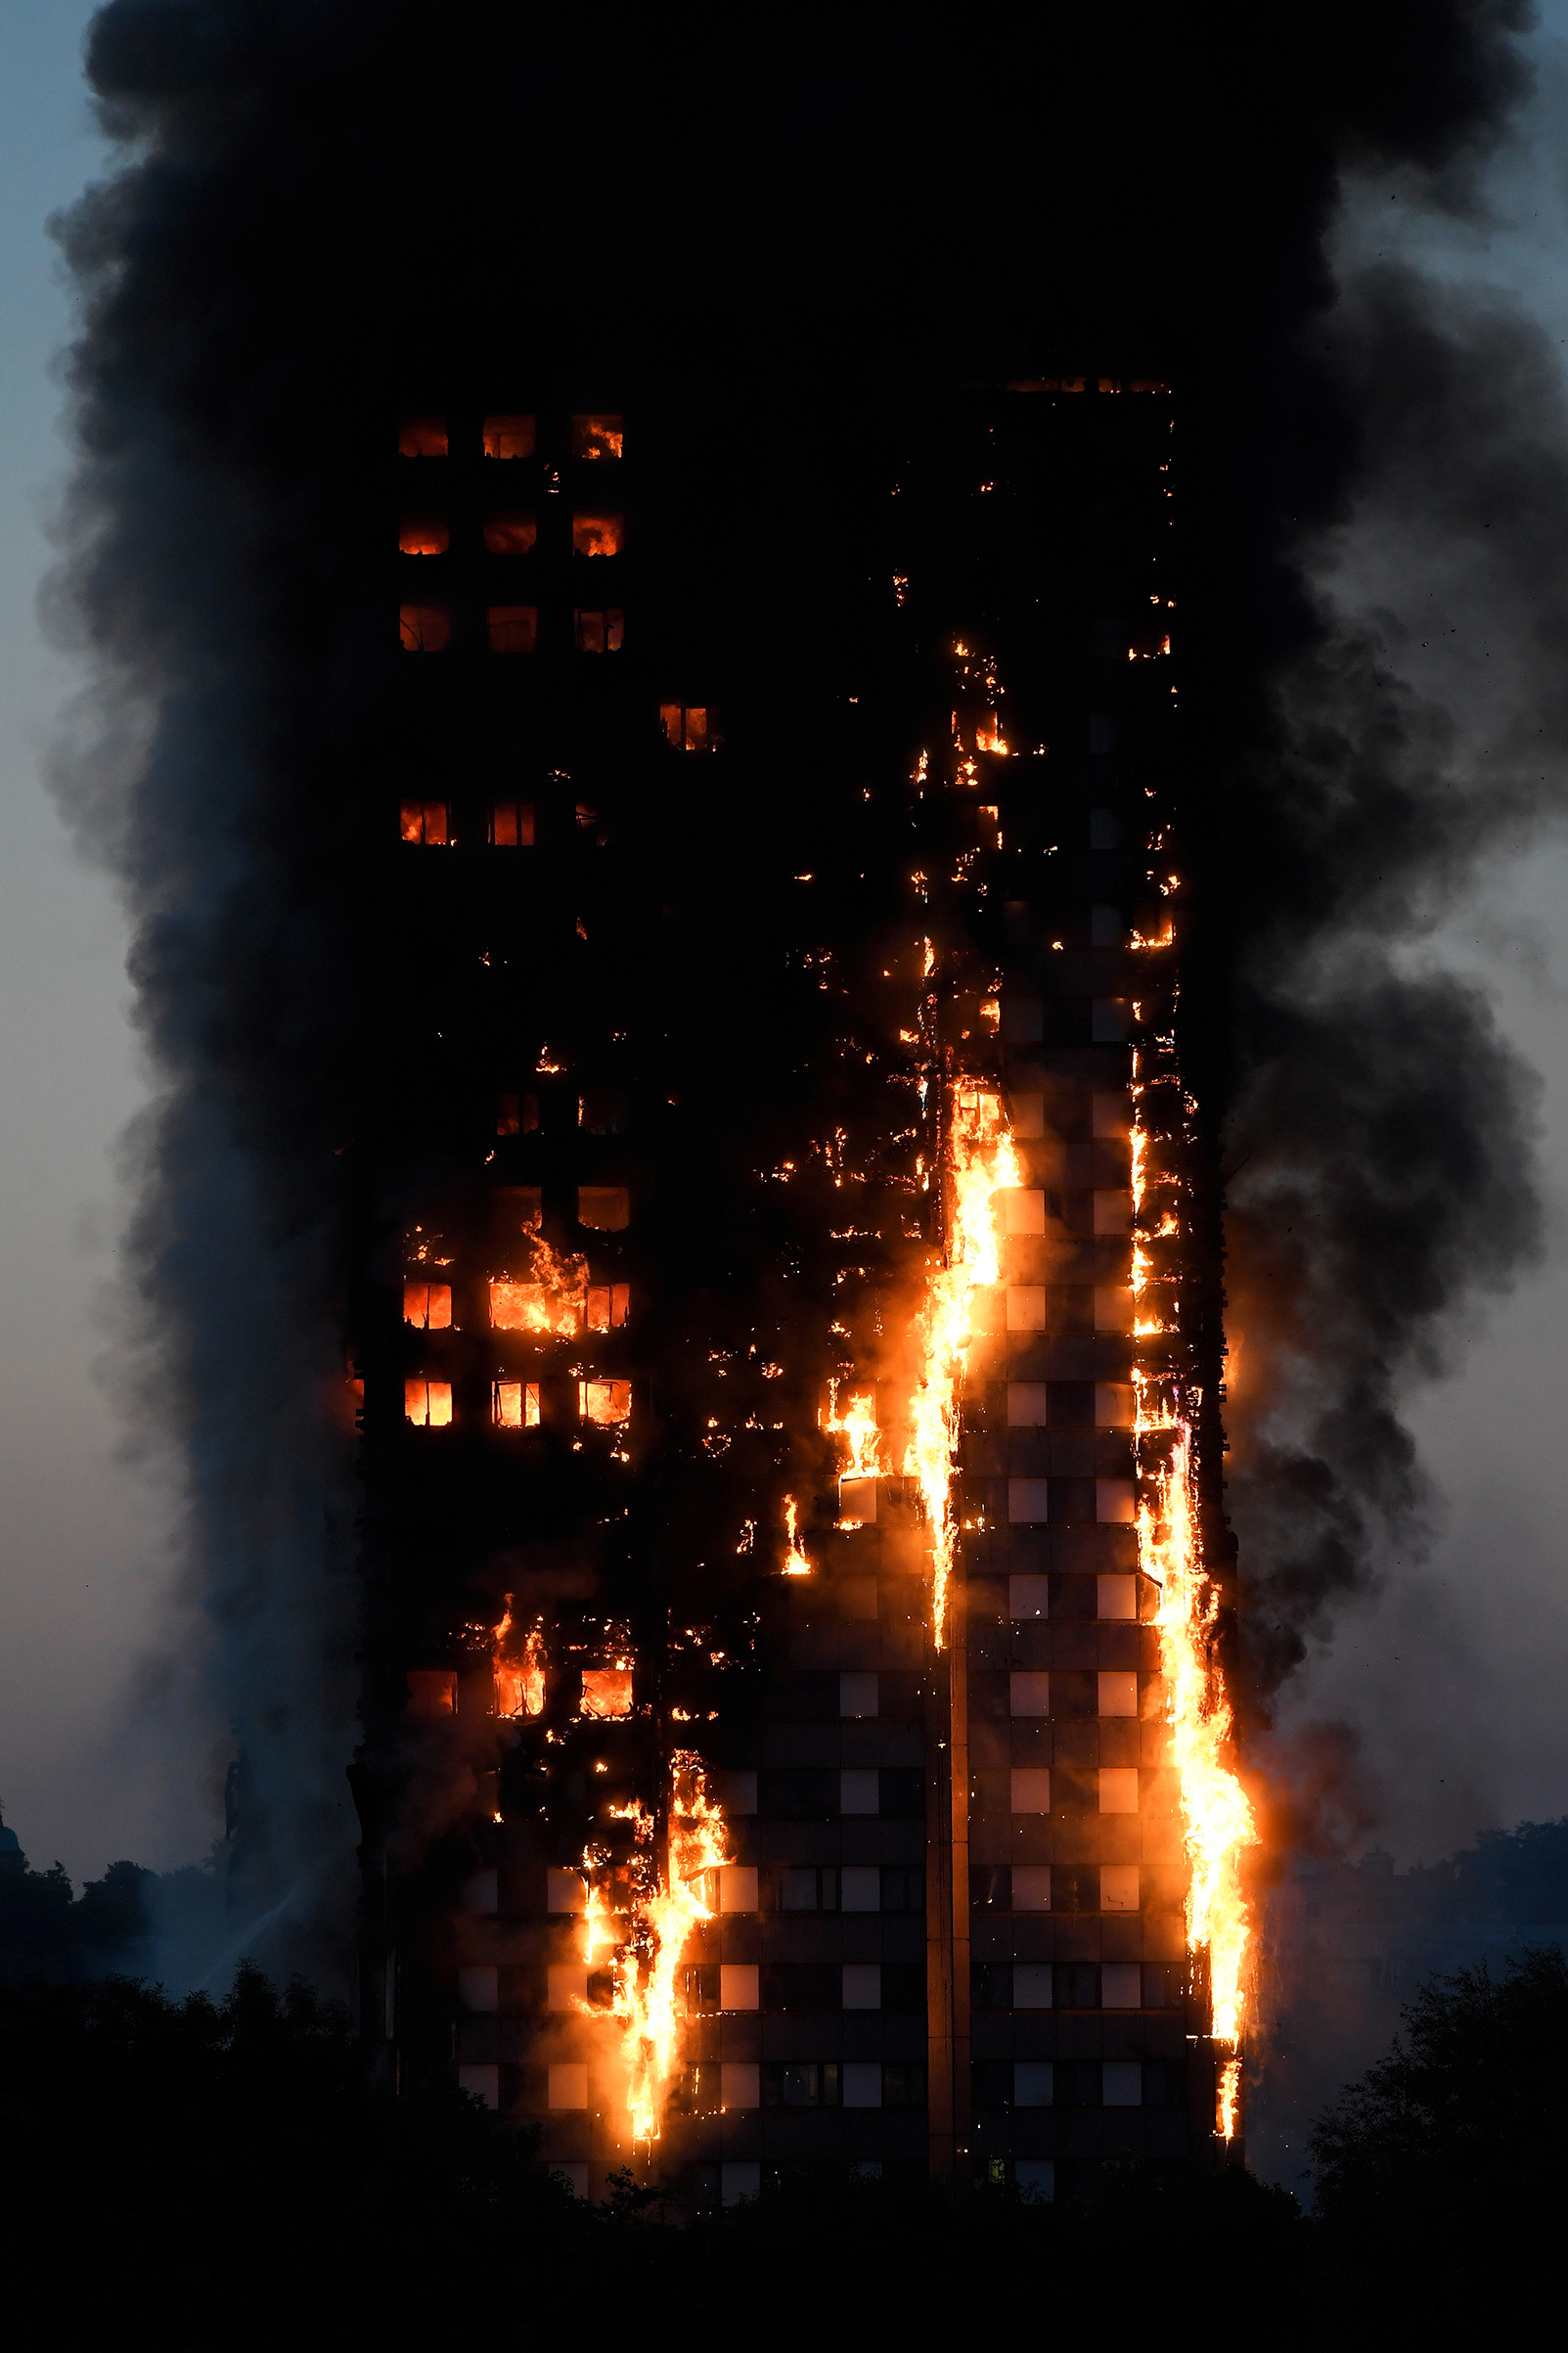 Flames and smoke billow as firefighters deal with a serious fire in a tower block at Latimer Road in West London on June 14, 2017.